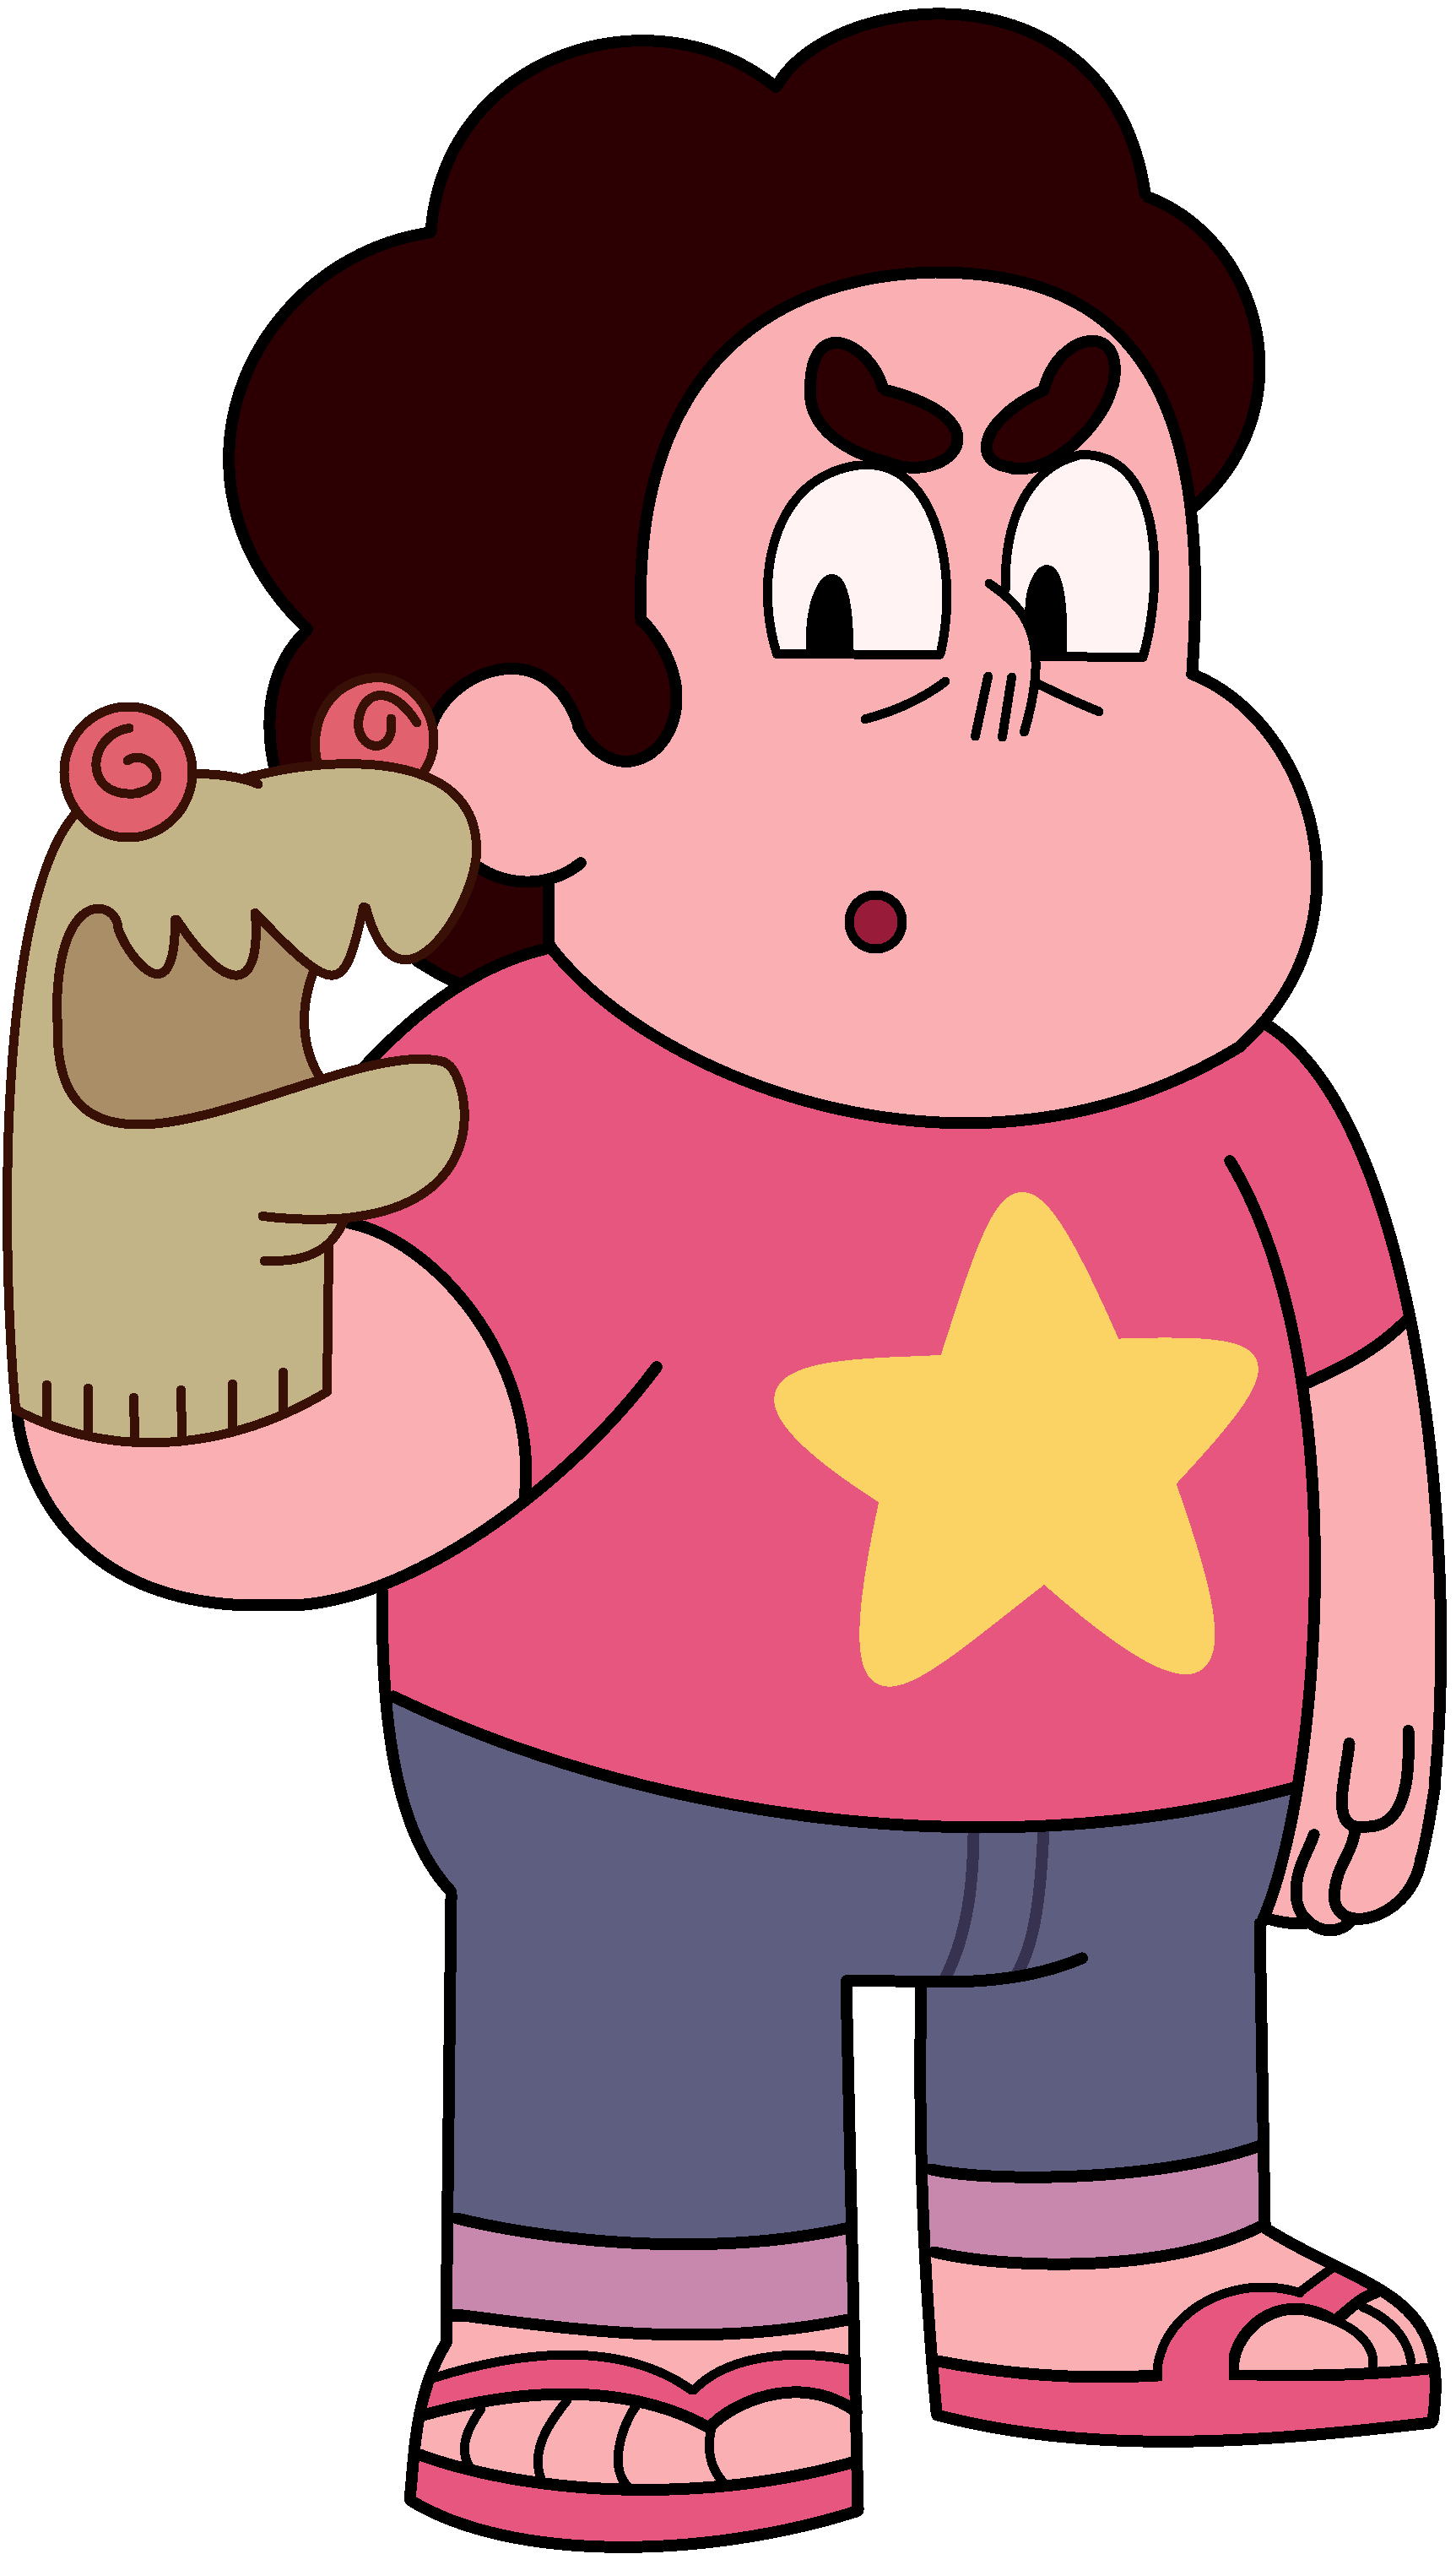 Steven Universe holding a sock puppet and speaking with it